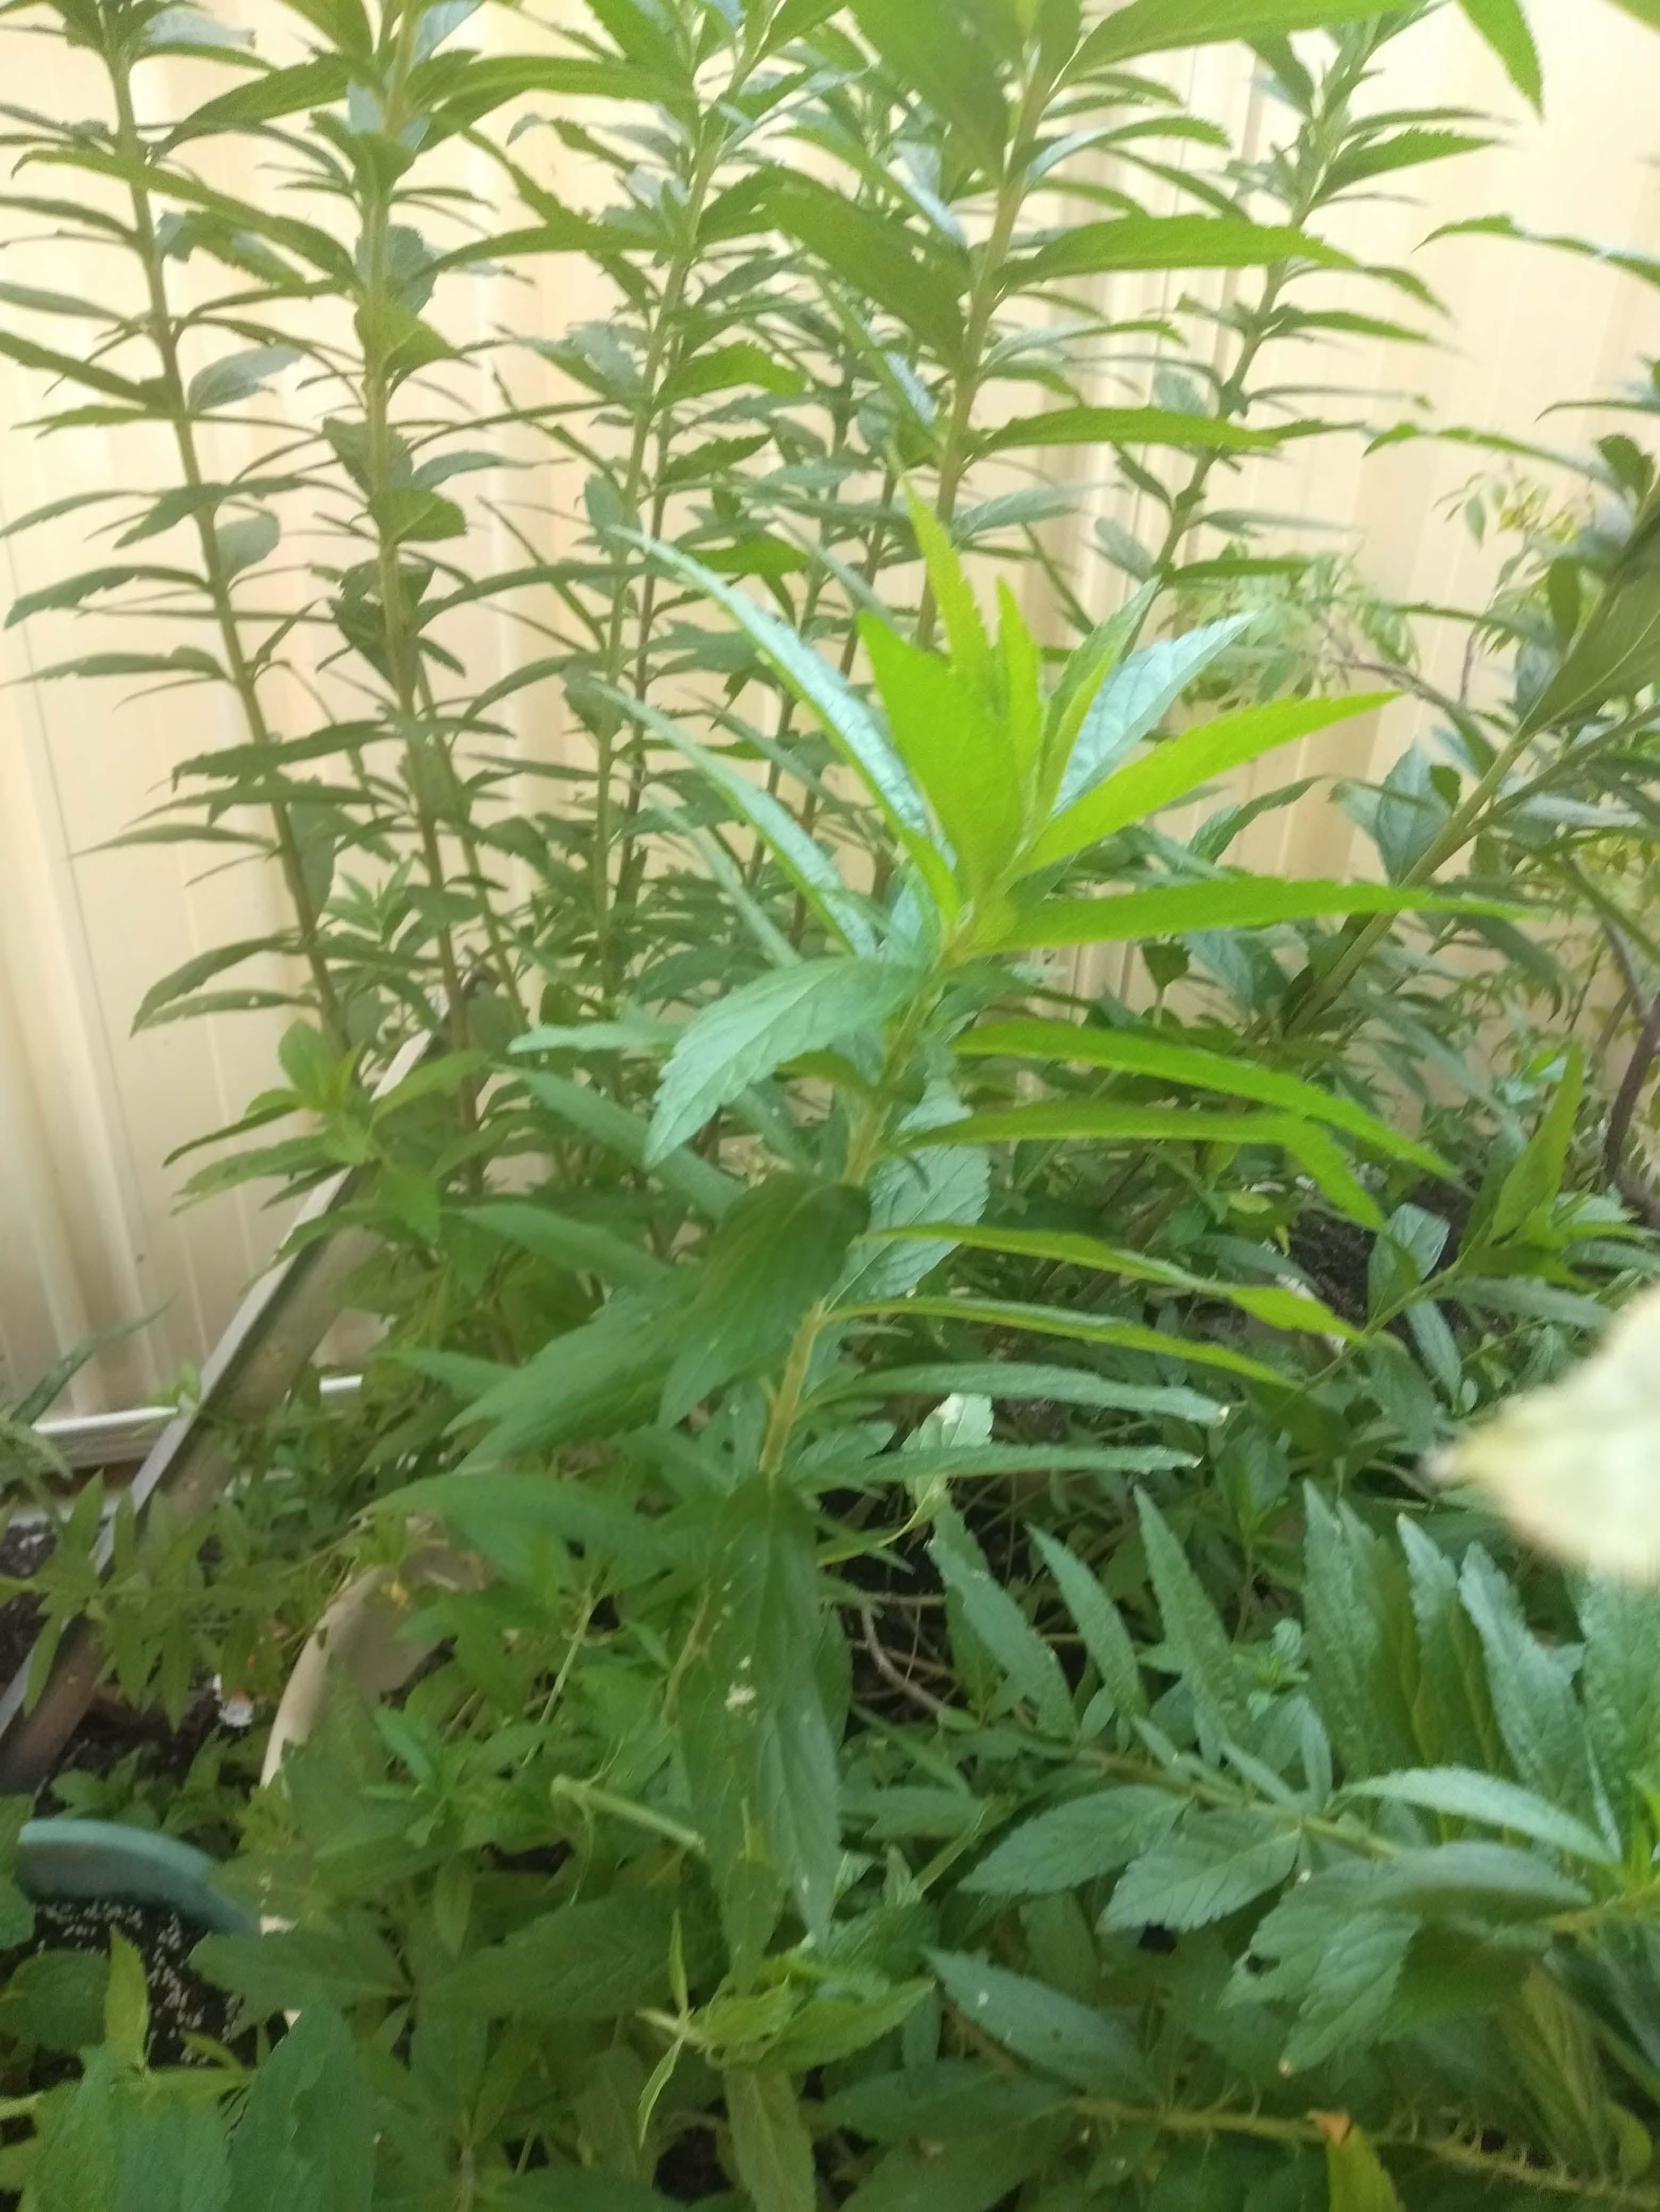 Great Grower Maybe Sage Plant Identification Non Cactus The Corroboree,Dark Soy Sauce Ingredients